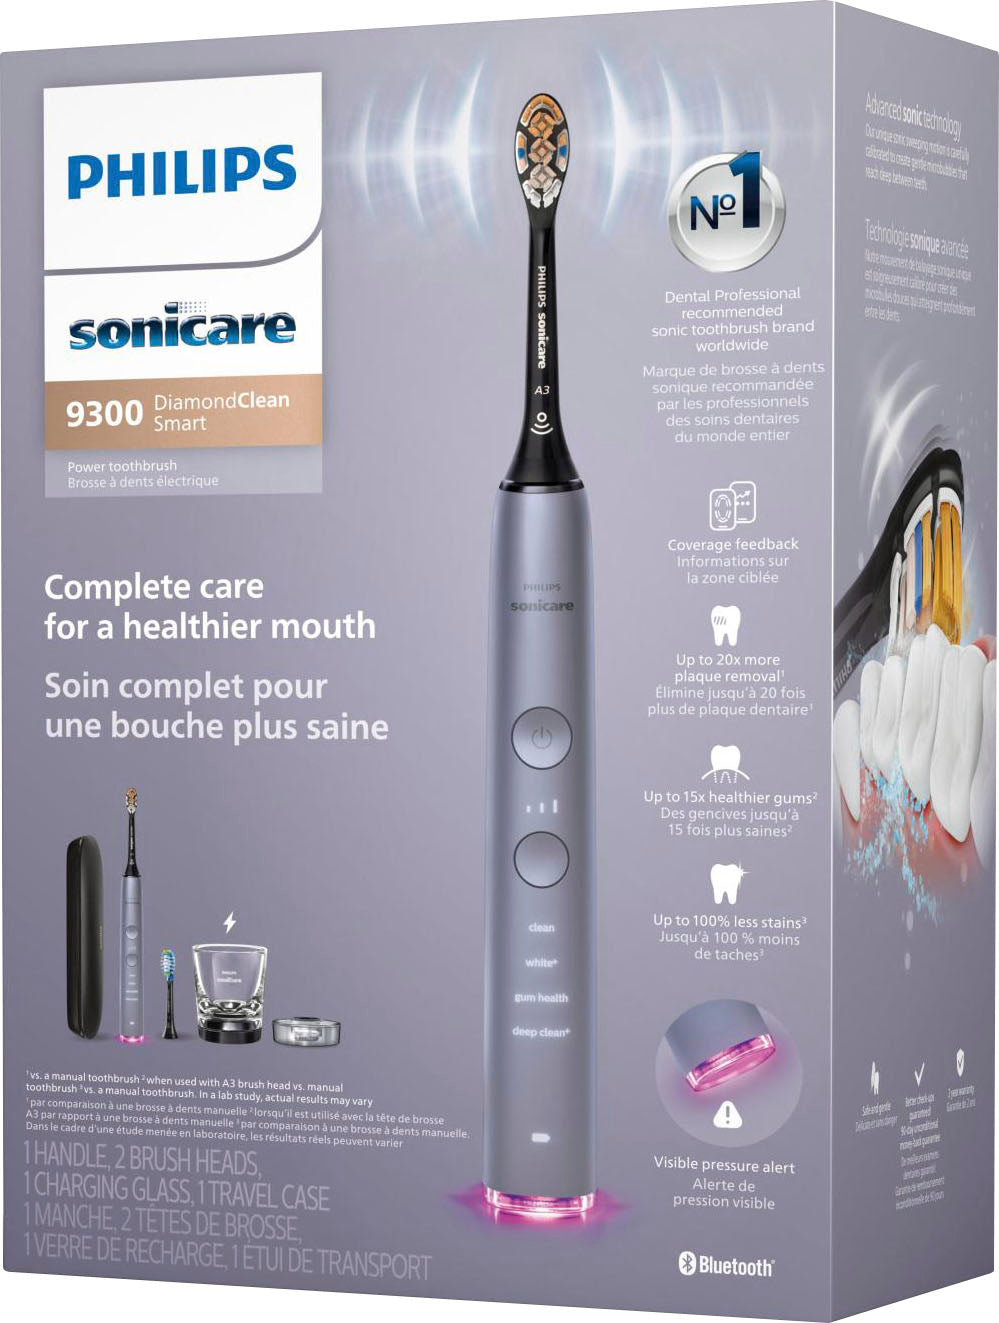 Philips Sonicare DiamondClean Smart Electric, Rechargeable Toothbrush for Complete Oral Care – 9300 Series - Grey_1